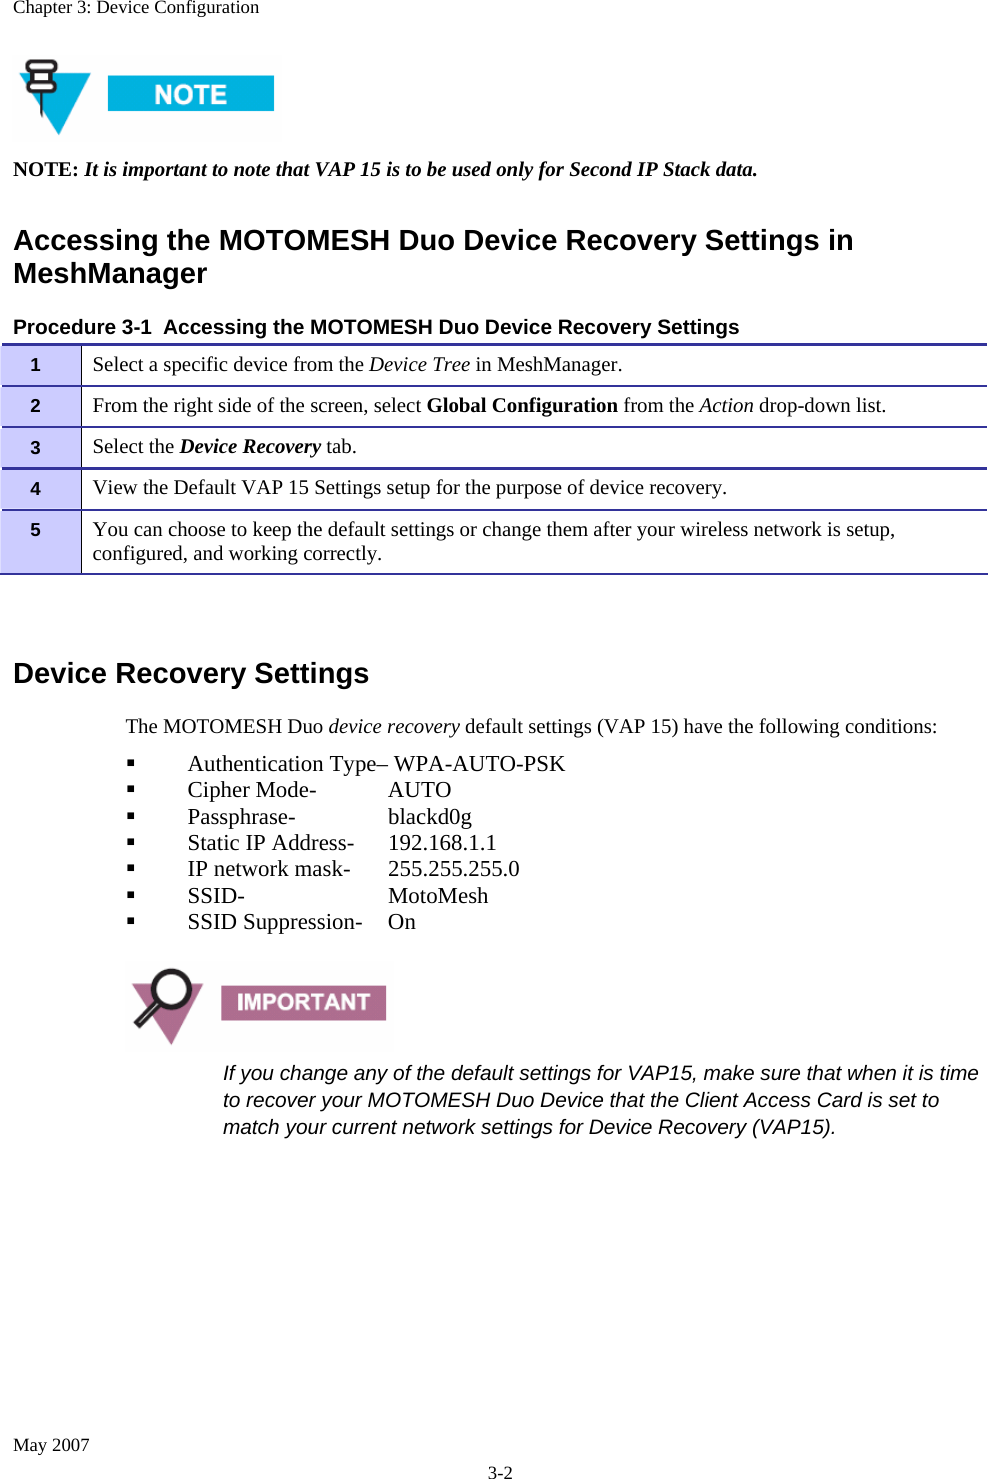 Chapter 3: Device Configuration May 2007 3-2  NOTE: It is important to note that VAP 15 is to be used only for Second IP Stack data. Accessing the MOTOMESH Duo Device Recovery Settings in MeshManager Procedure 3-1  Accessing the MOTOMESH Duo Device Recovery Settings 1   Select a specific device from the Device Tree in MeshManager. 2   From the right side of the screen, select Global Configuration from the Action drop-down list. 3   Select the Device Recovery tab. 4   View the Default VAP 15 Settings setup for the purpose of device recovery. 5   You can choose to keep the default settings or change them after your wireless network is setup, configured, and working correctly.  Device Recovery Settings The MOTOMESH Duo device recovery default settings (VAP 15) have the following conditions:          Authentication Type– WPA-AUTO-PSK          Cipher Mode-  AUTO          Passphrase-    blackd0g          Static IP Address-  192.168.1.1          IP network mask-  255.255.255.0          SSID-    MotoMesh          SSID Suppression-  On   If you change any of the default settings for VAP15, make sure that when it is time to recover your MOTOMESH Duo Device that the Client Access Card is set to match your current network settings for Device Recovery (VAP15). 